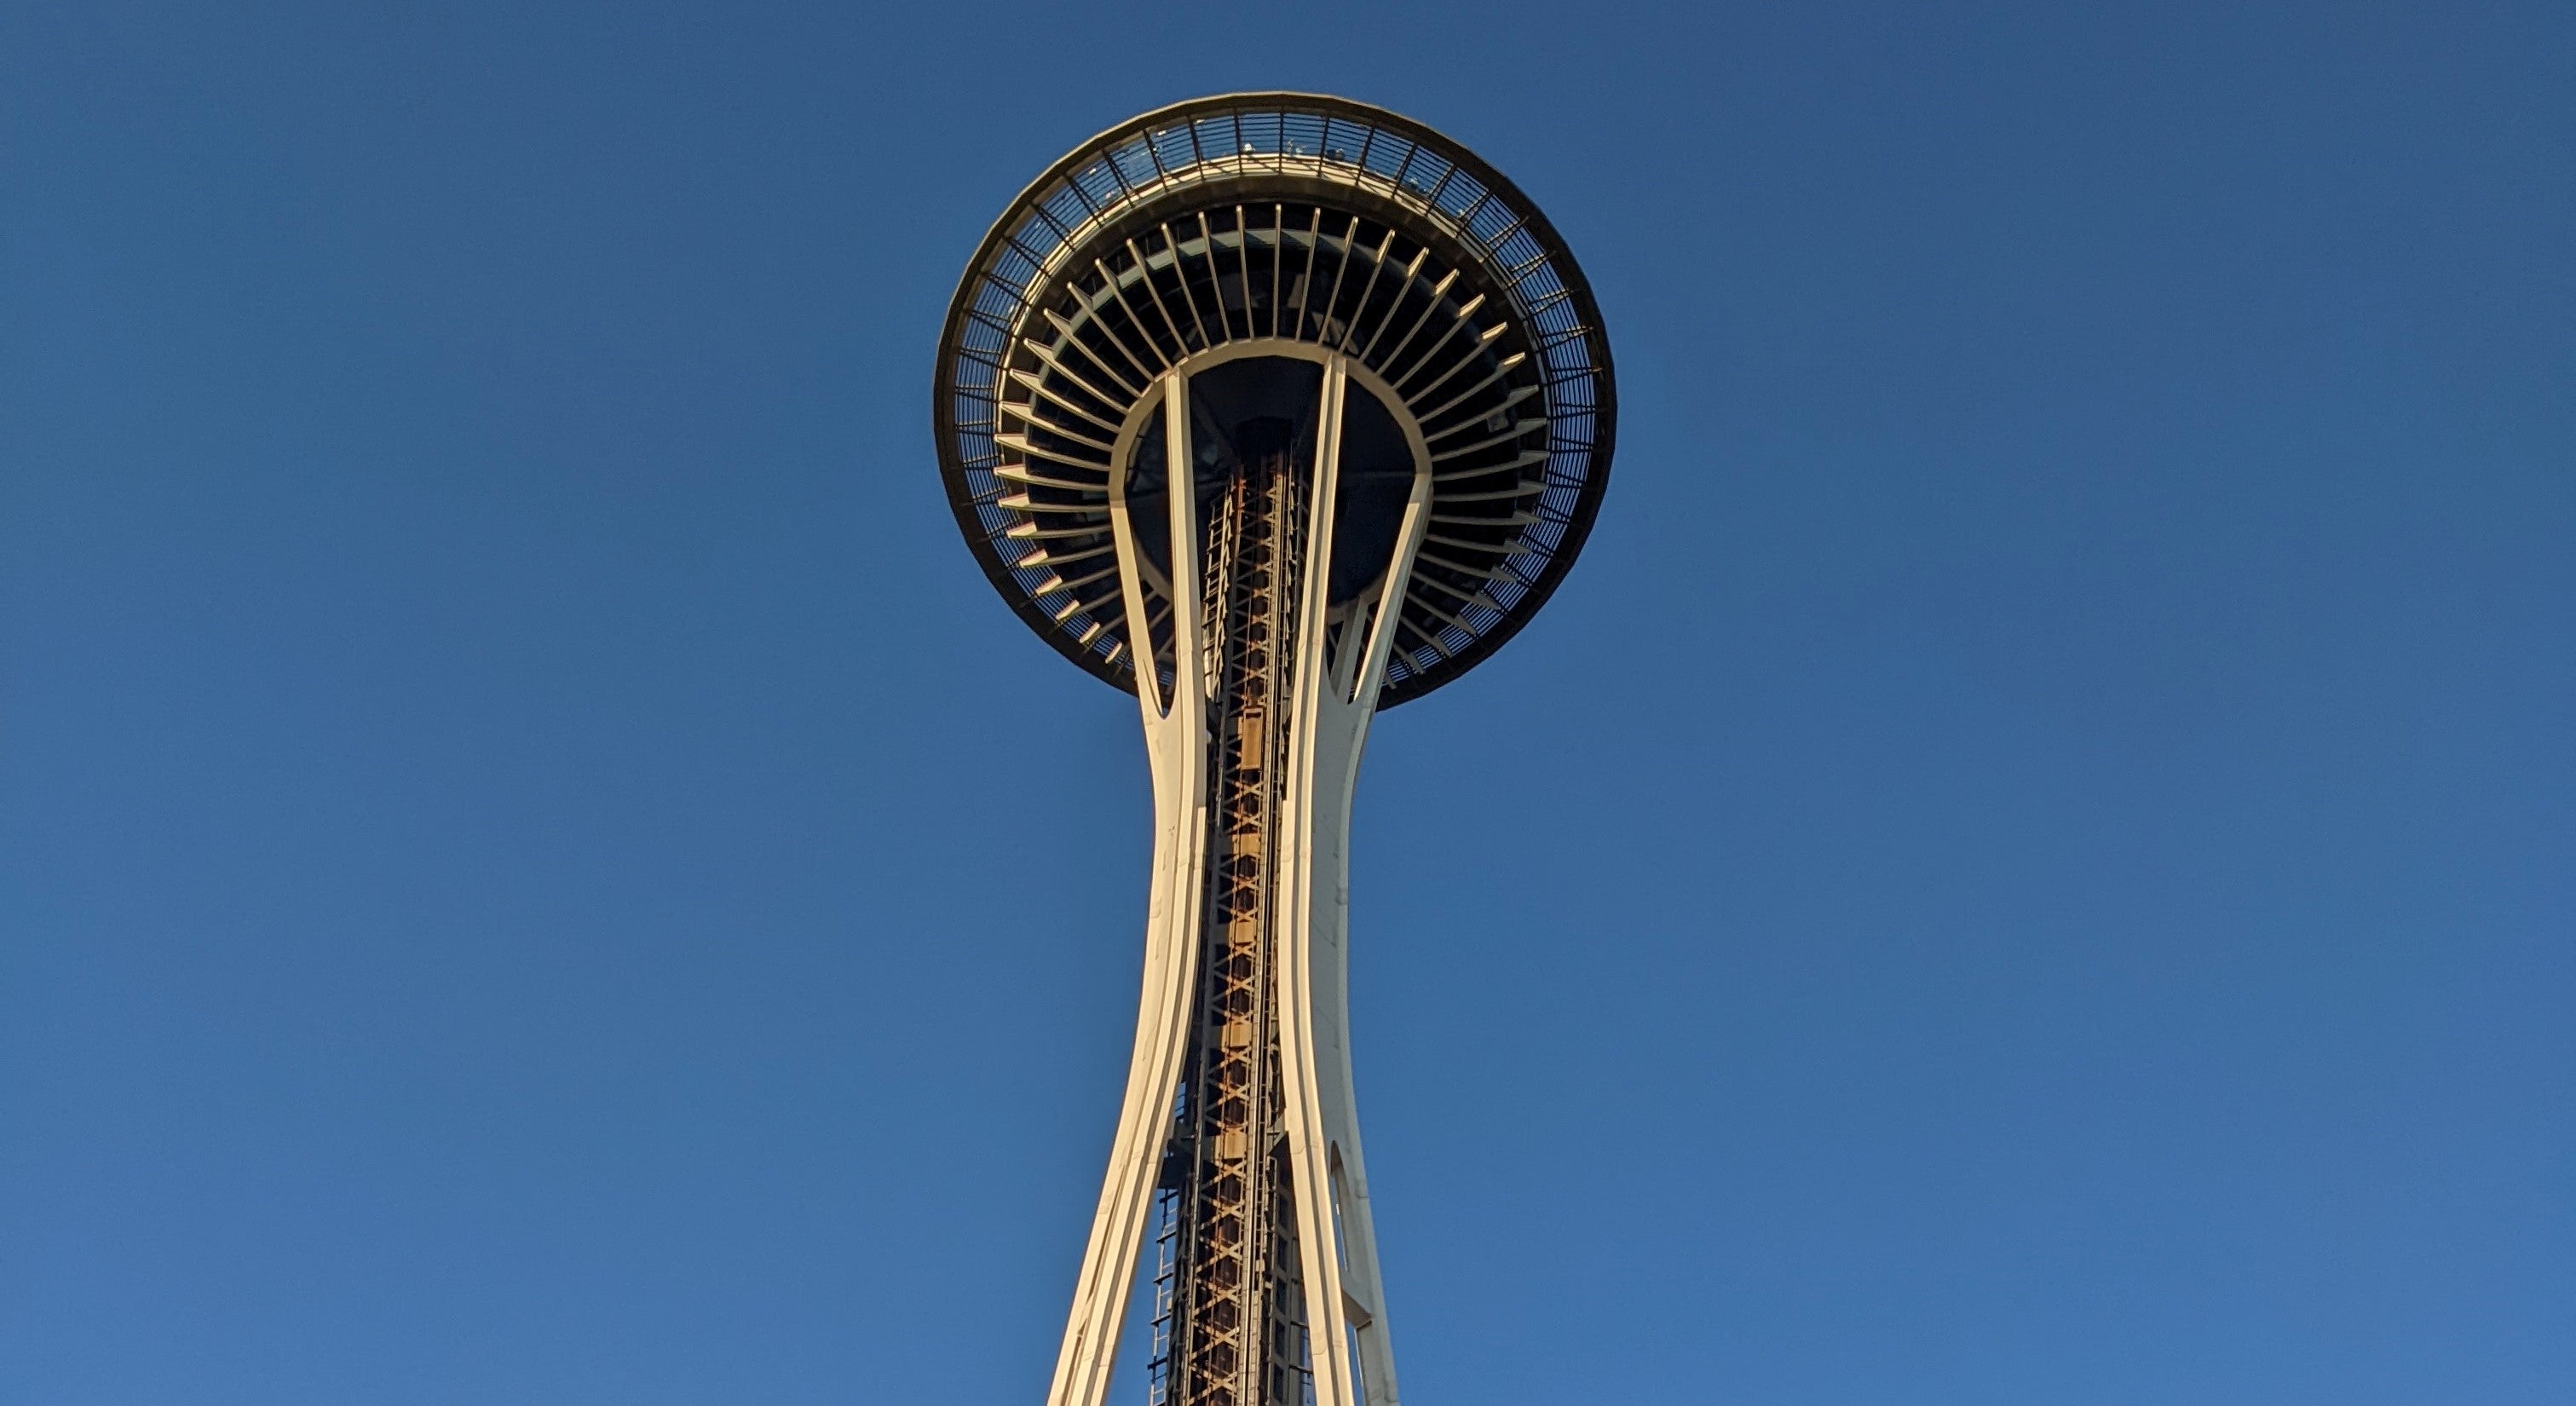 Photograph of the Space Needle from a low point of view during the day